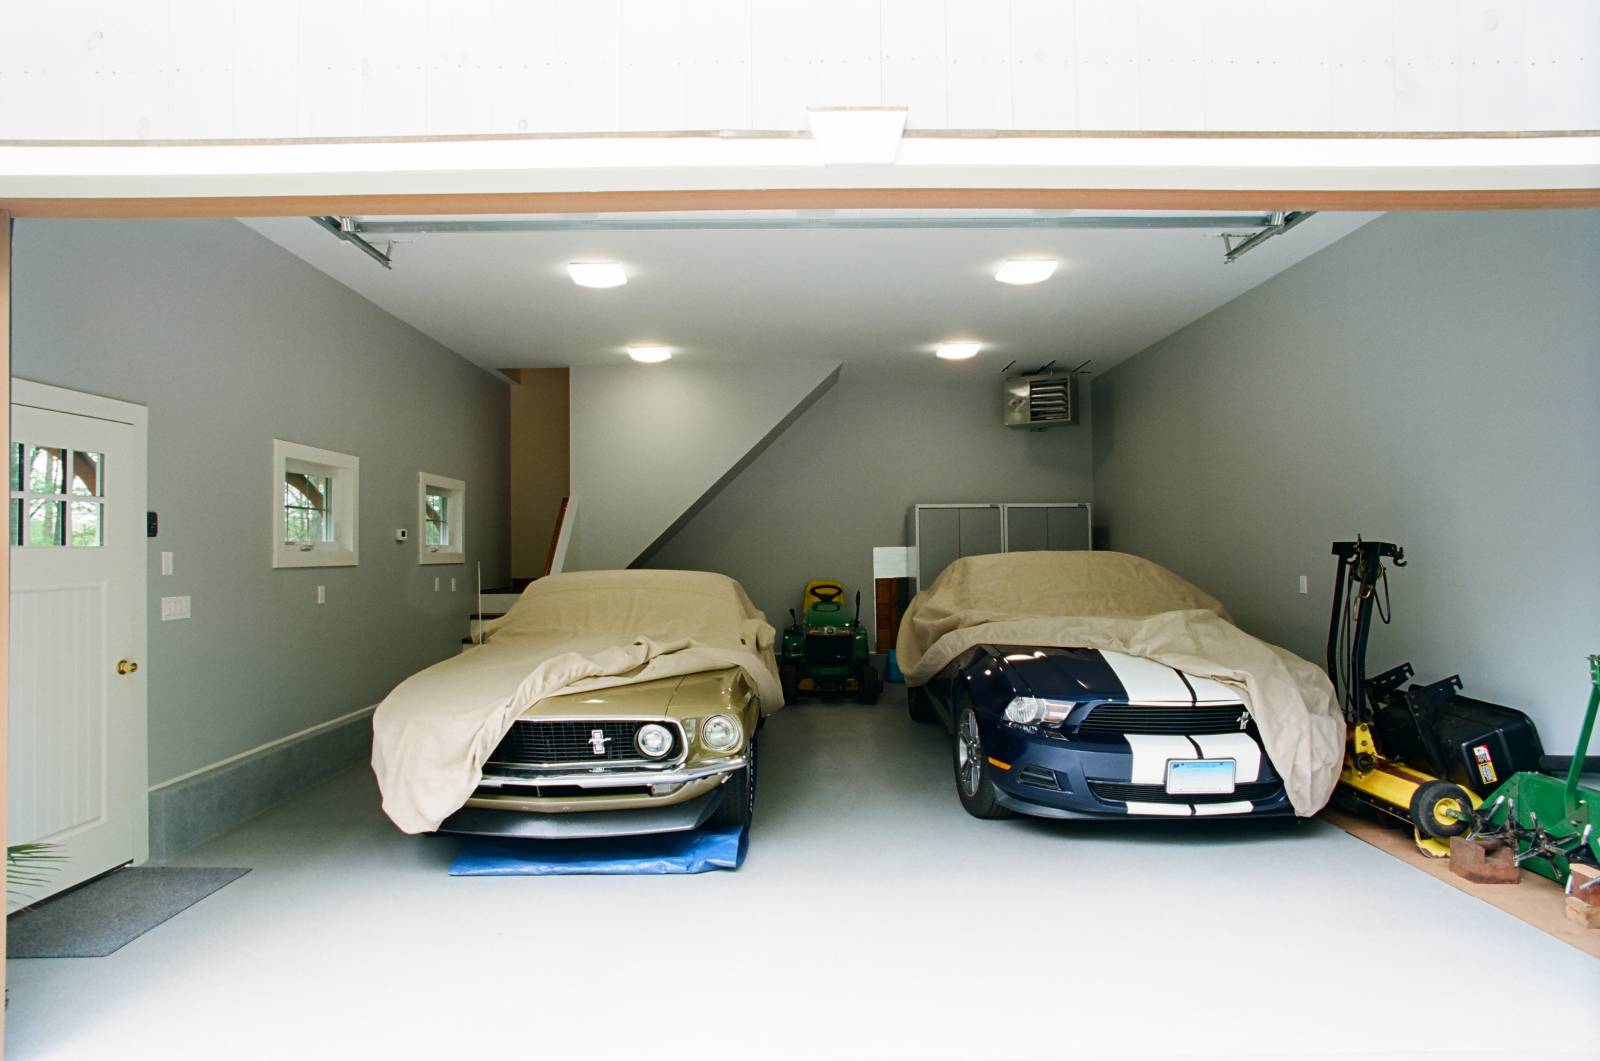 A pair of Mustangs in the finished 2-car garage